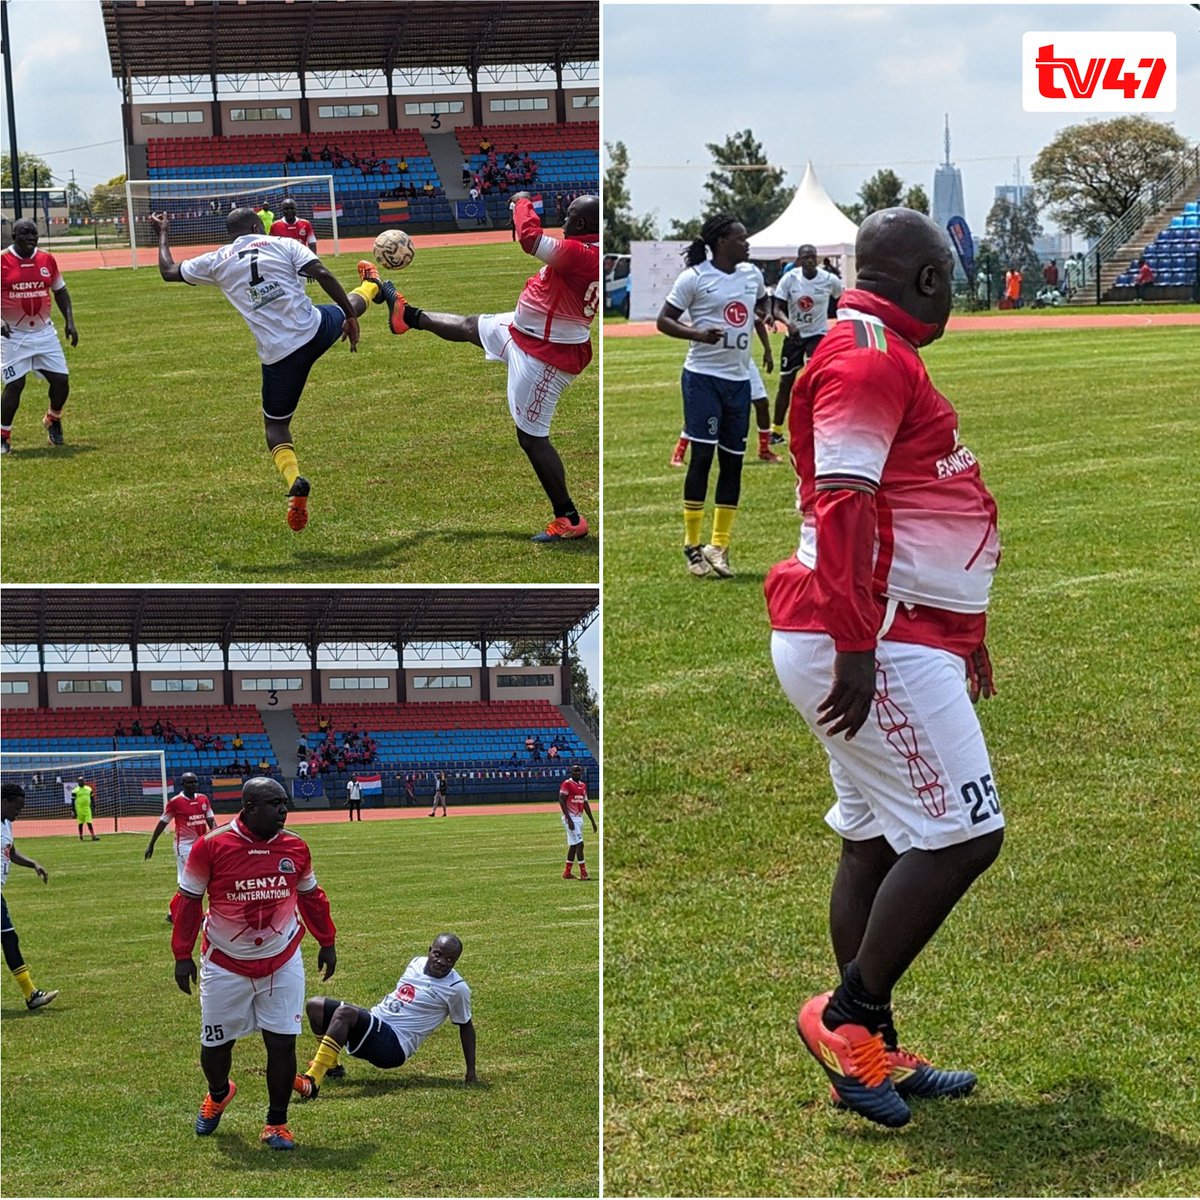 Radio47 and TV47's @fred_arocho in action during #EuropeDayKenya Football ⚽️ Tournament at 🏟️Ulinzi Sports Complex🏟️ The exhibition match between Ex-Kenyan Internationals vs Kenya Sports Journalists Association ended 2-0 in favour of the retirees. Legends Dennis Oliech and